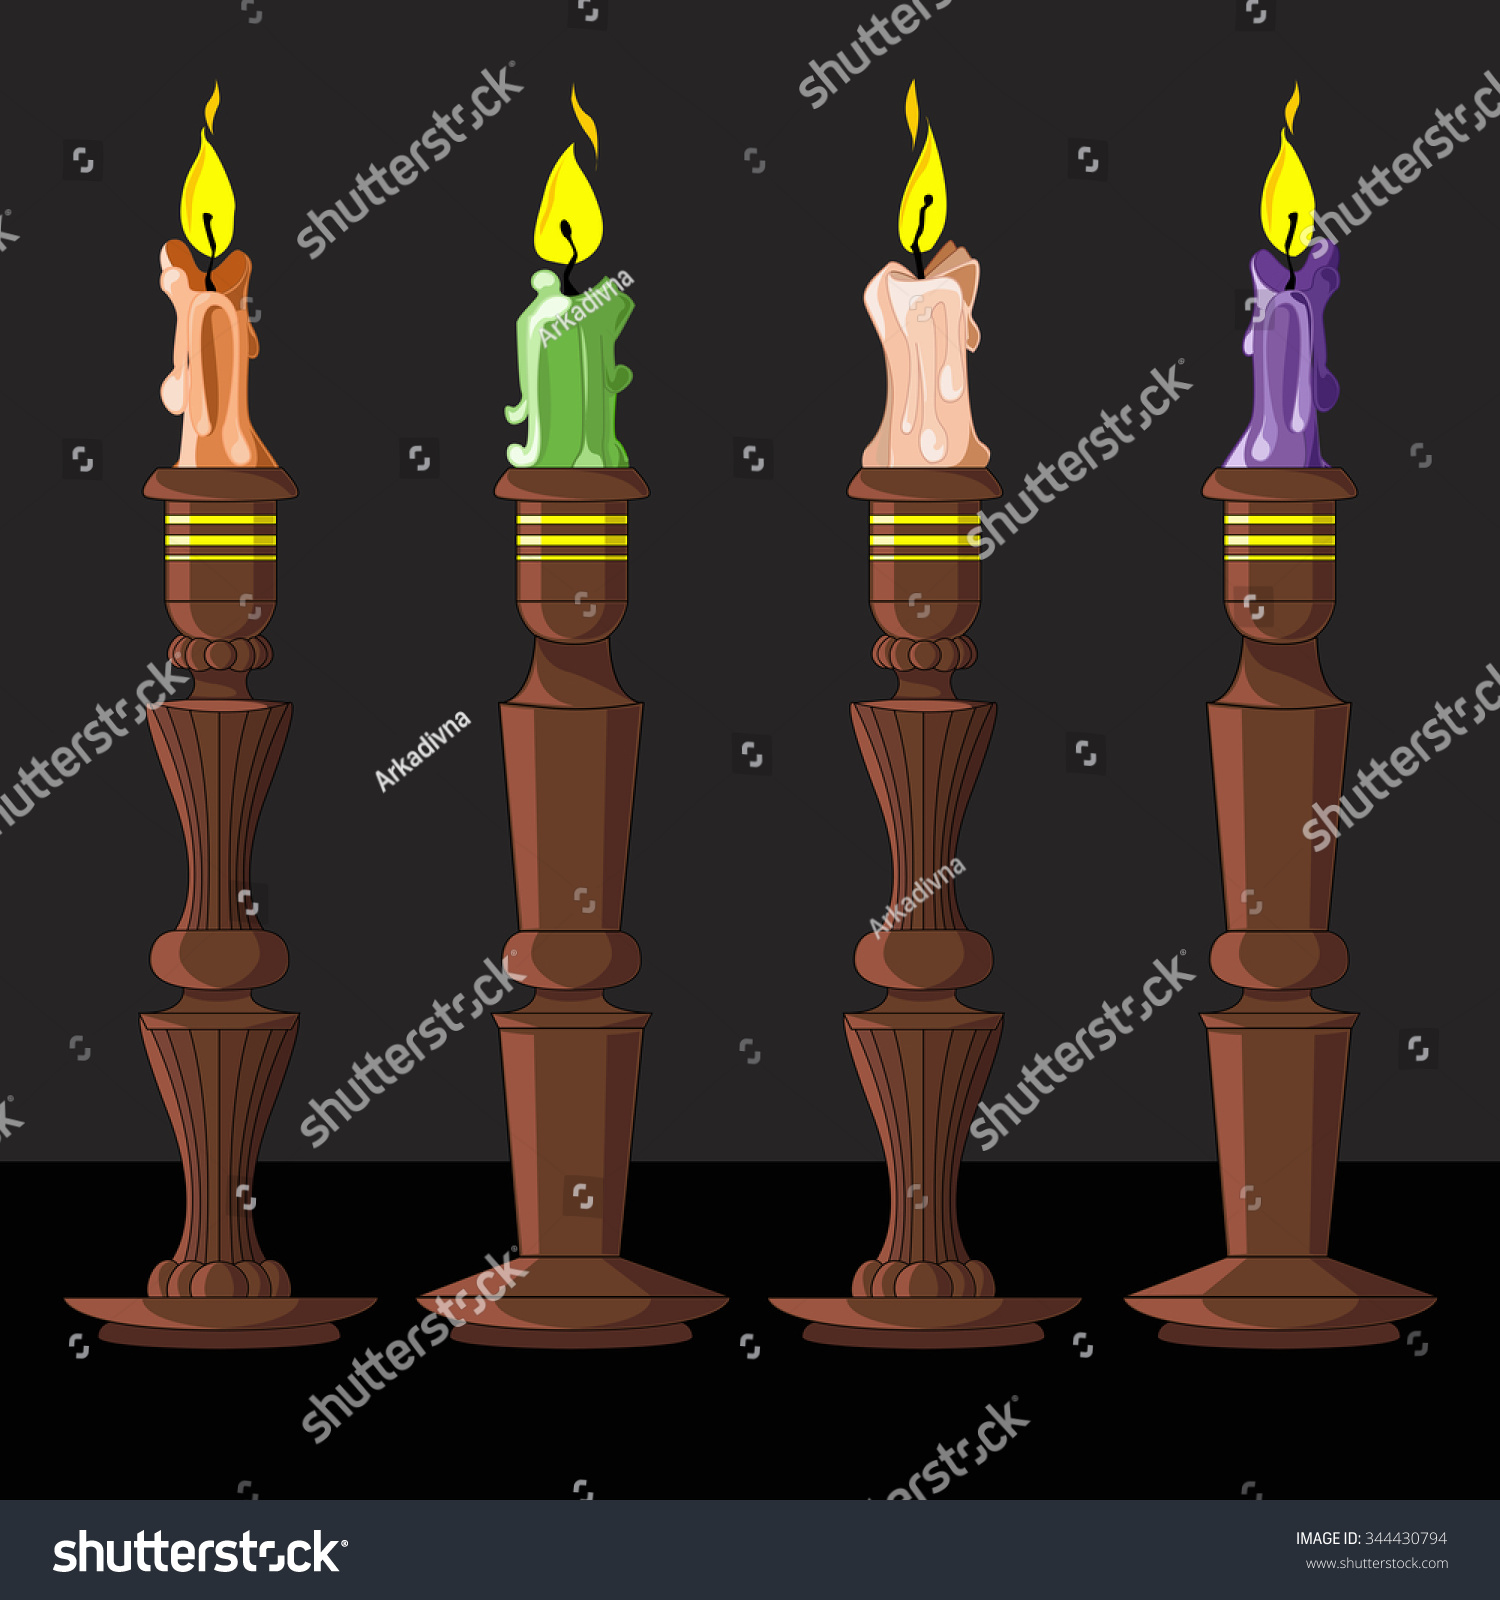 Vector Illustration Of A Candle In Candlestick - 344430794 : Shutterstock